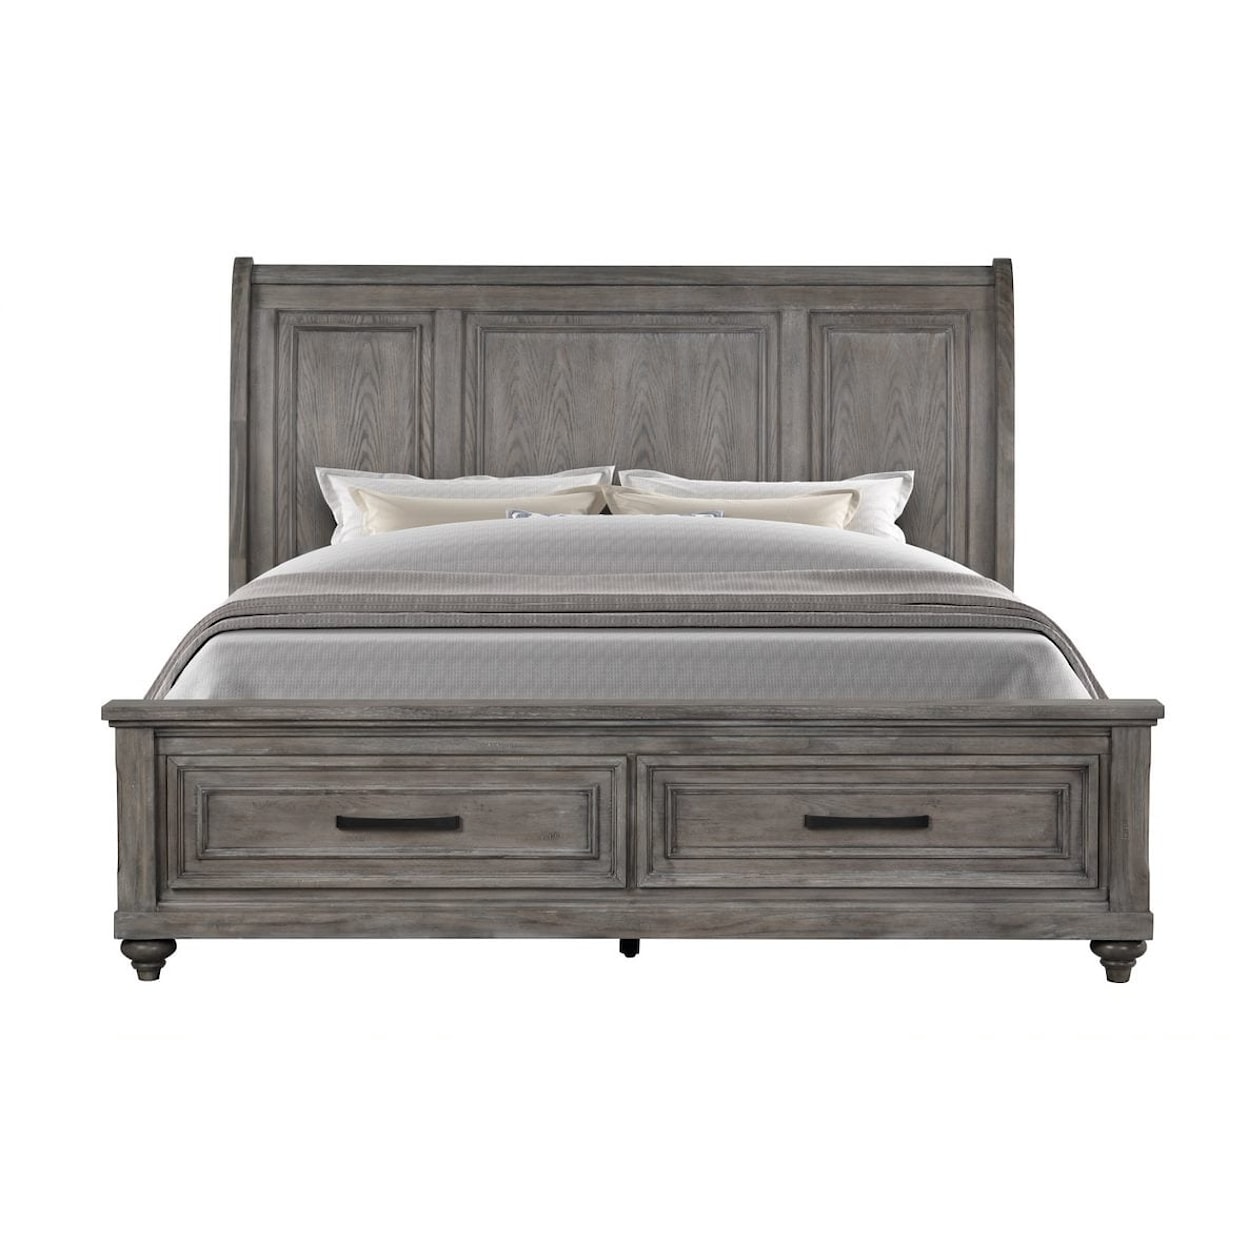 Legends Furniture Linsey Collection Queen Sleigh Bed